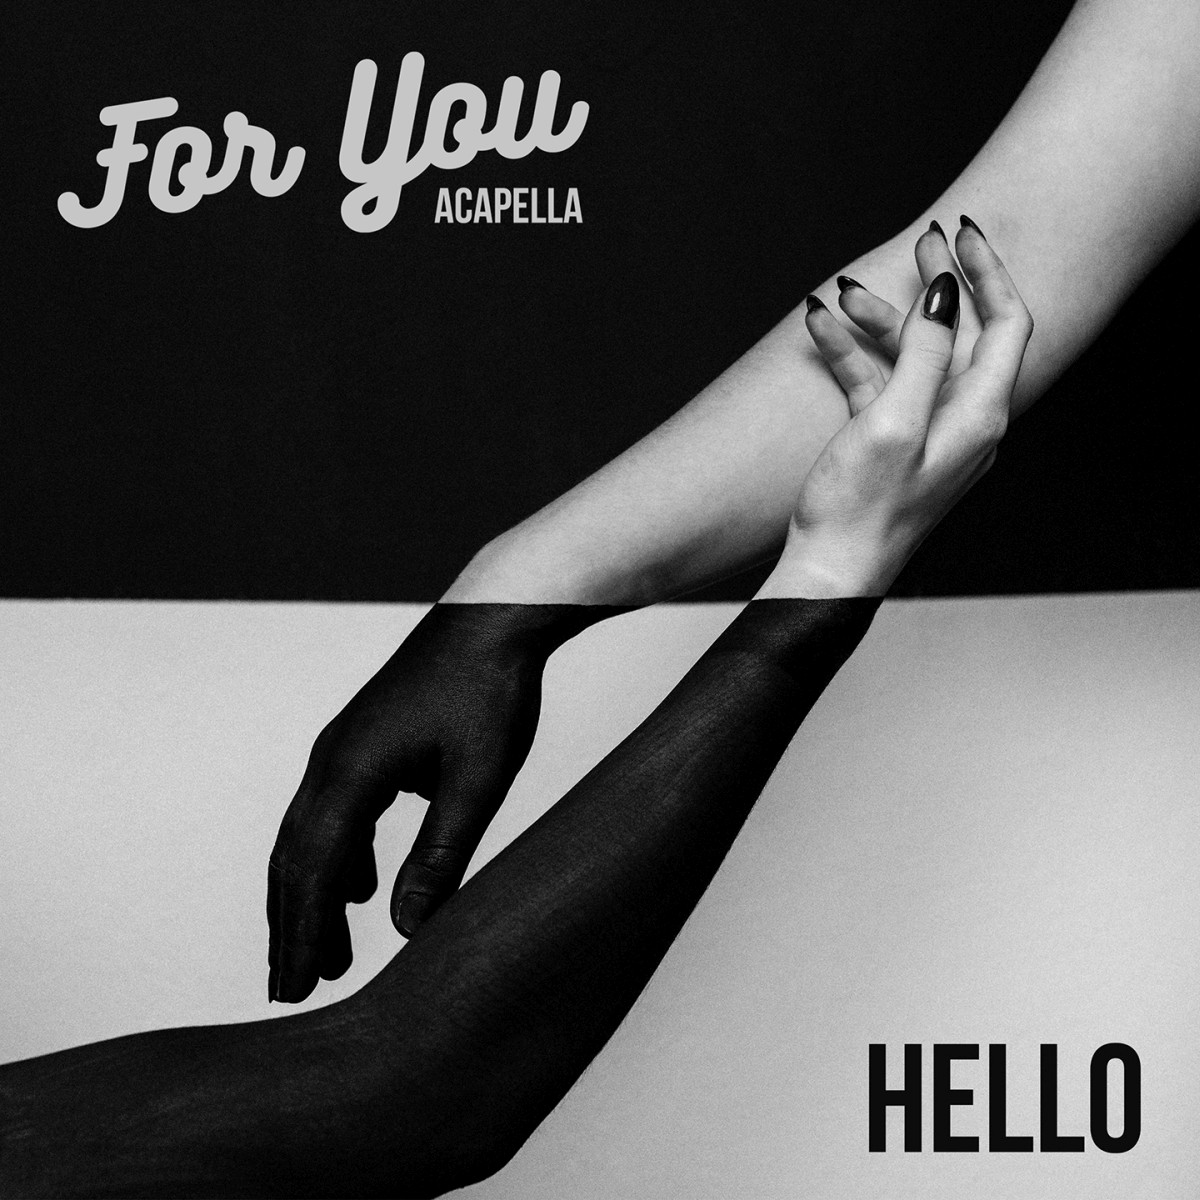 CD Shop - FOR YOU HELLO